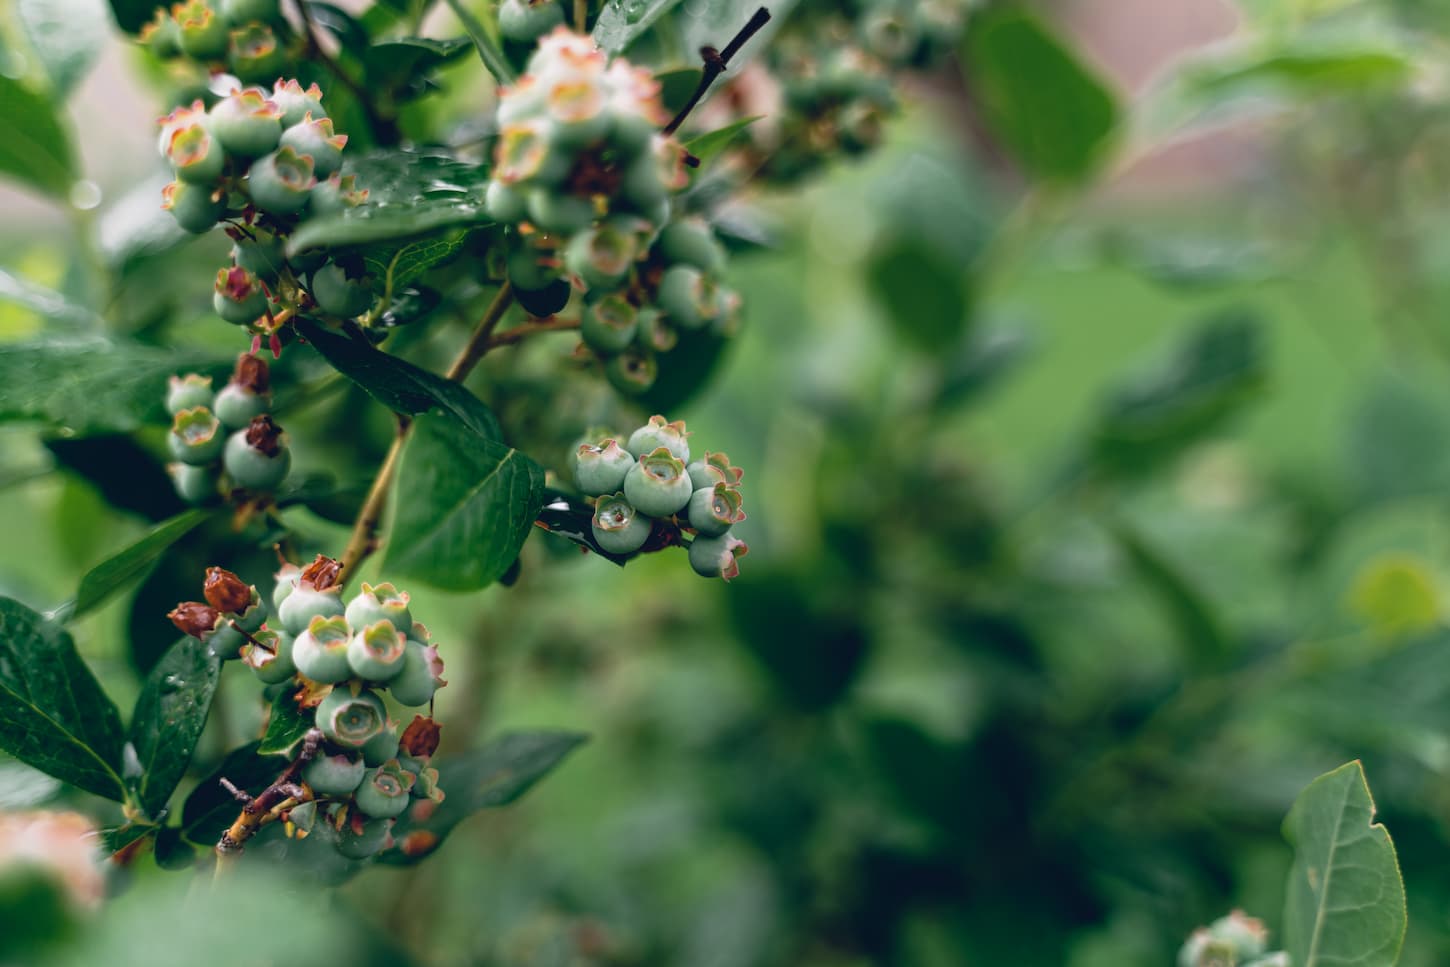 An image of green and unripe blue berries in the garden.